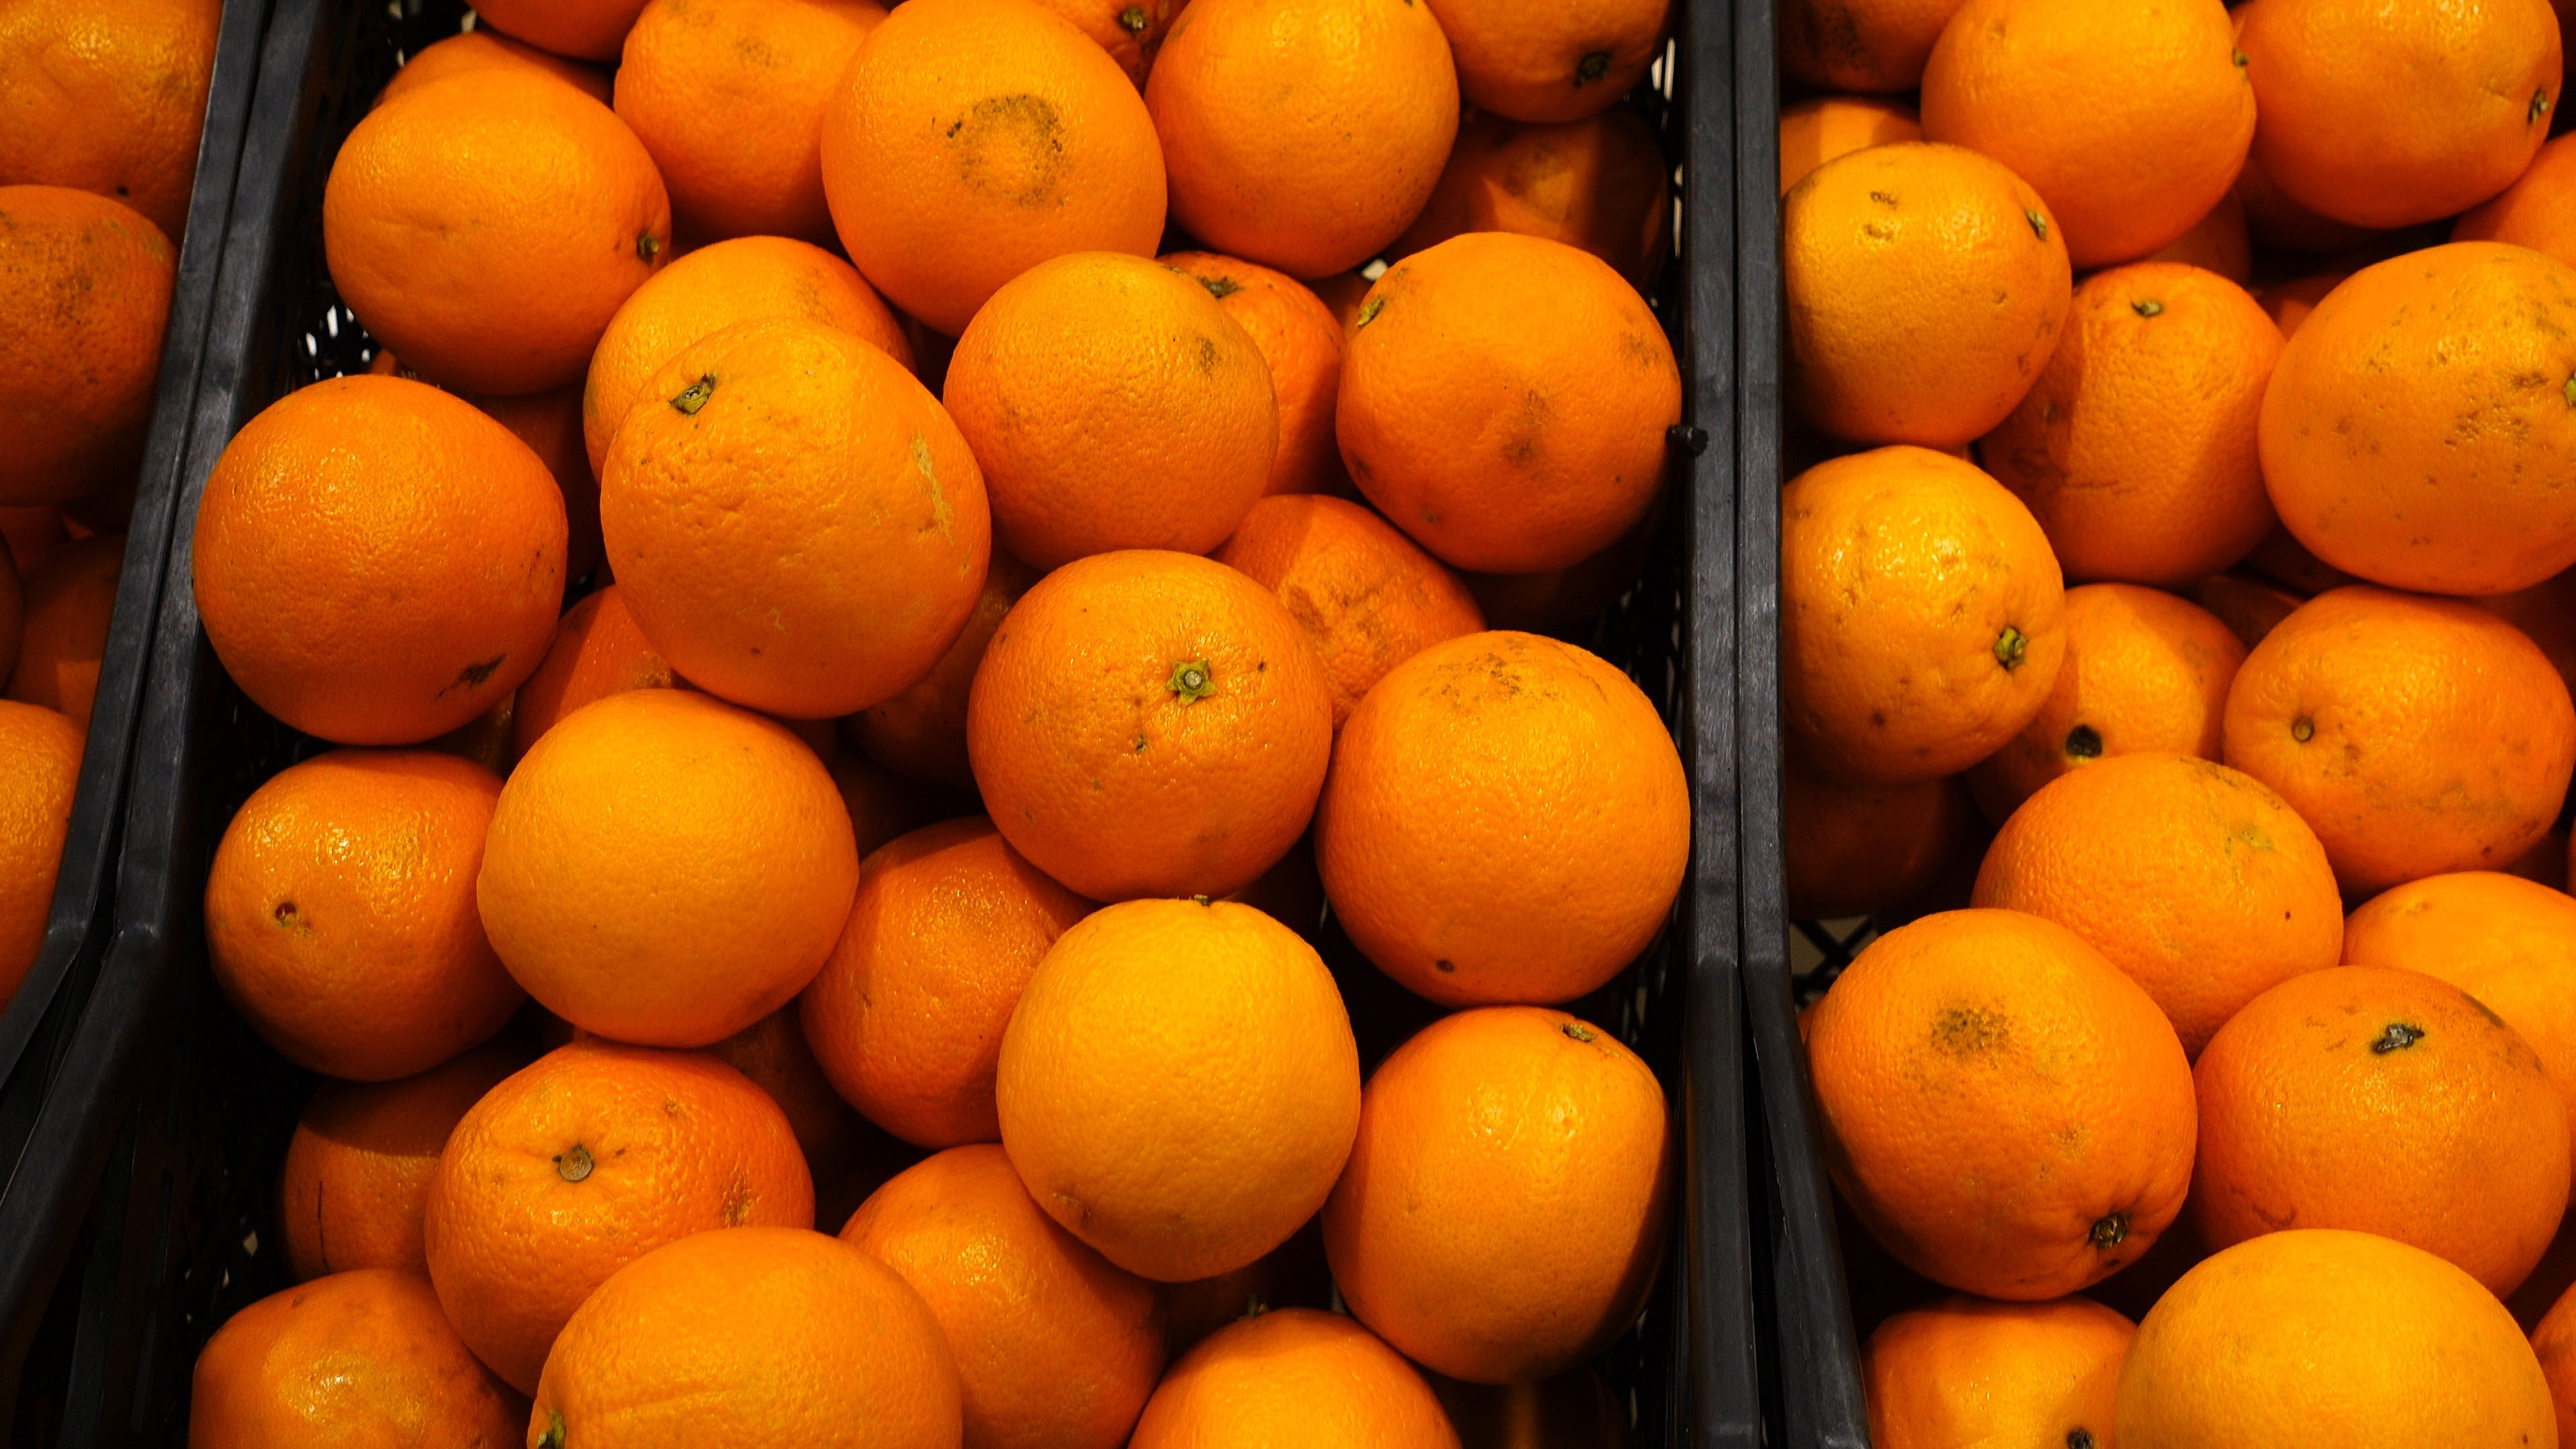 Oranges in a supermarket. #agriculture #background #business #buy ...